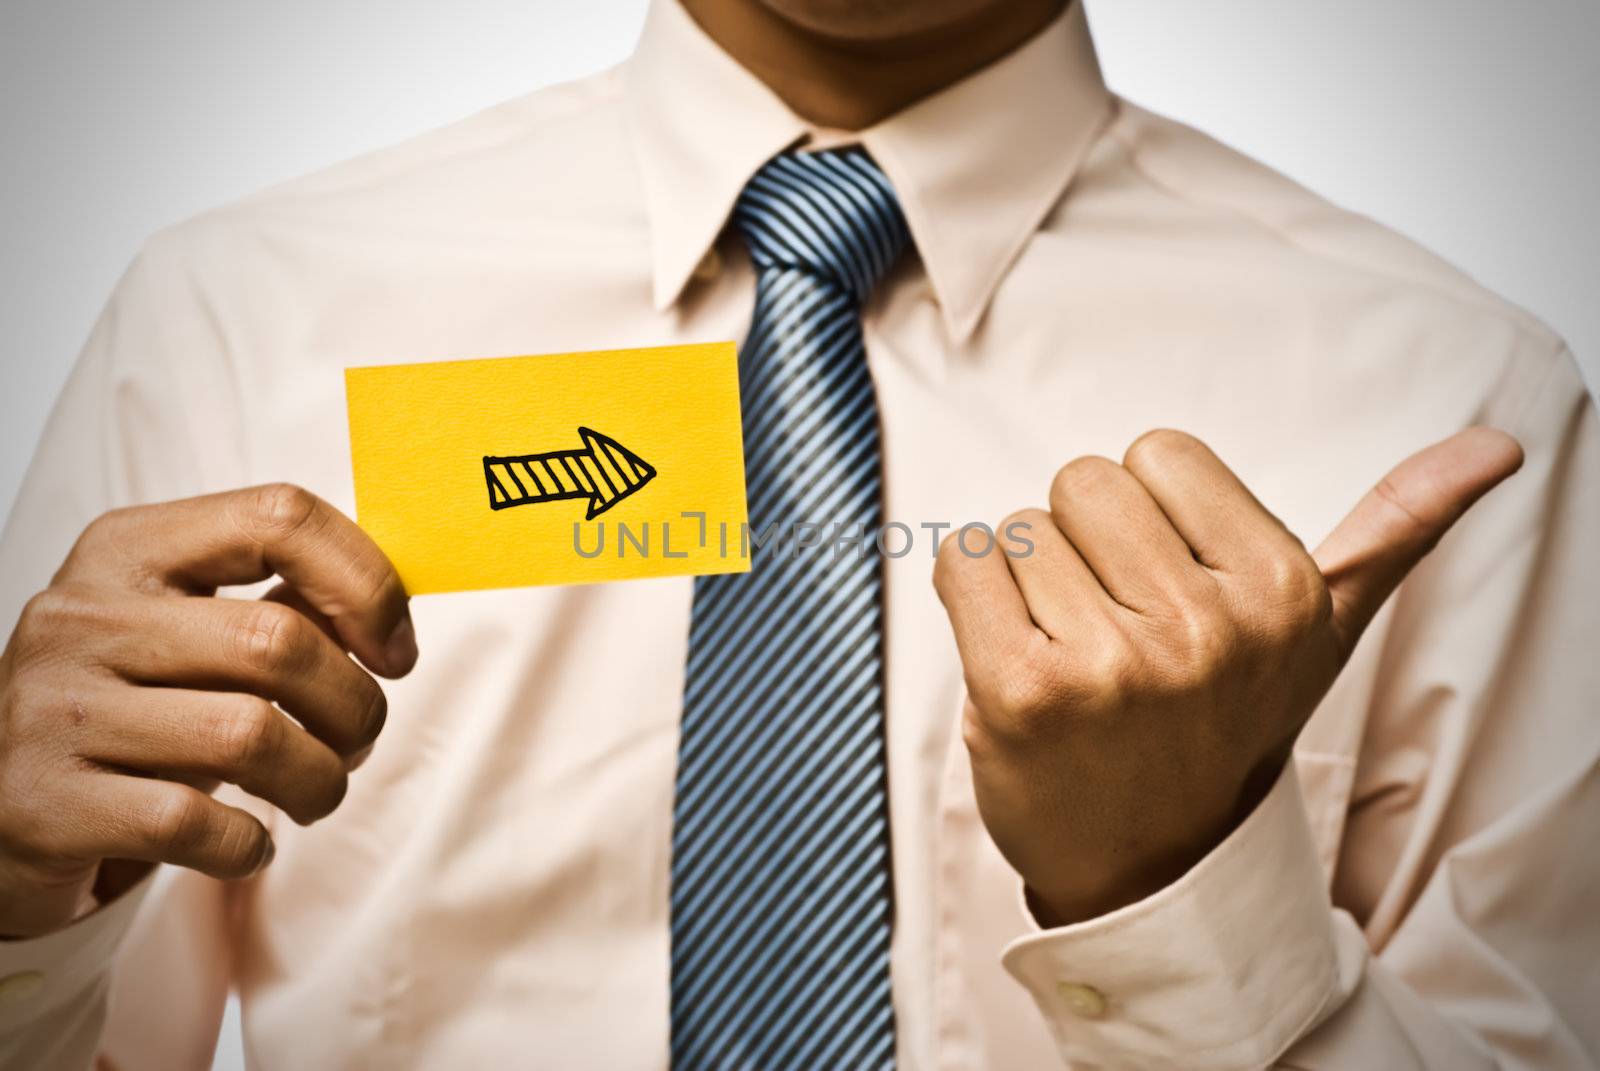 Arrow shape on yellow card and hand gesture by businessman.